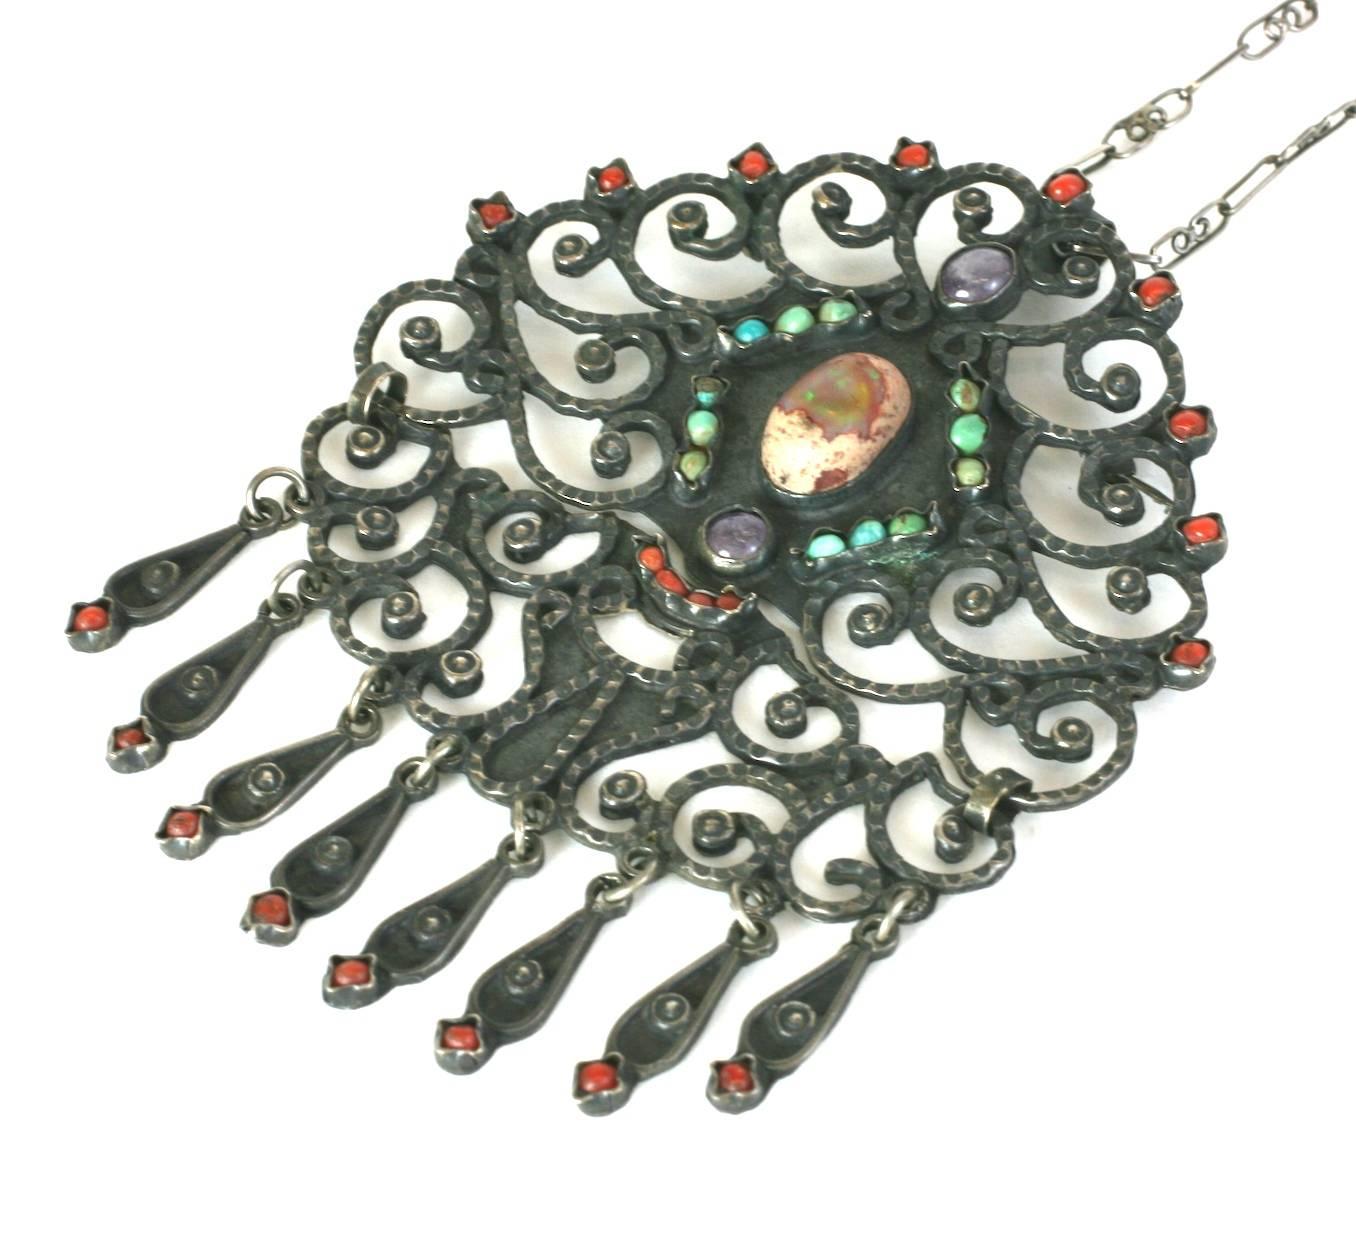 Elaborate Mat'l Style Sterling and Stone Pendant Necklace set in sterling silver. Large articulated pendant set with a large Mexican opal, red coral, amythest and turquoise. Handmade sterling swirl bar chain. Made in Mexico, circa 1950.
Signed